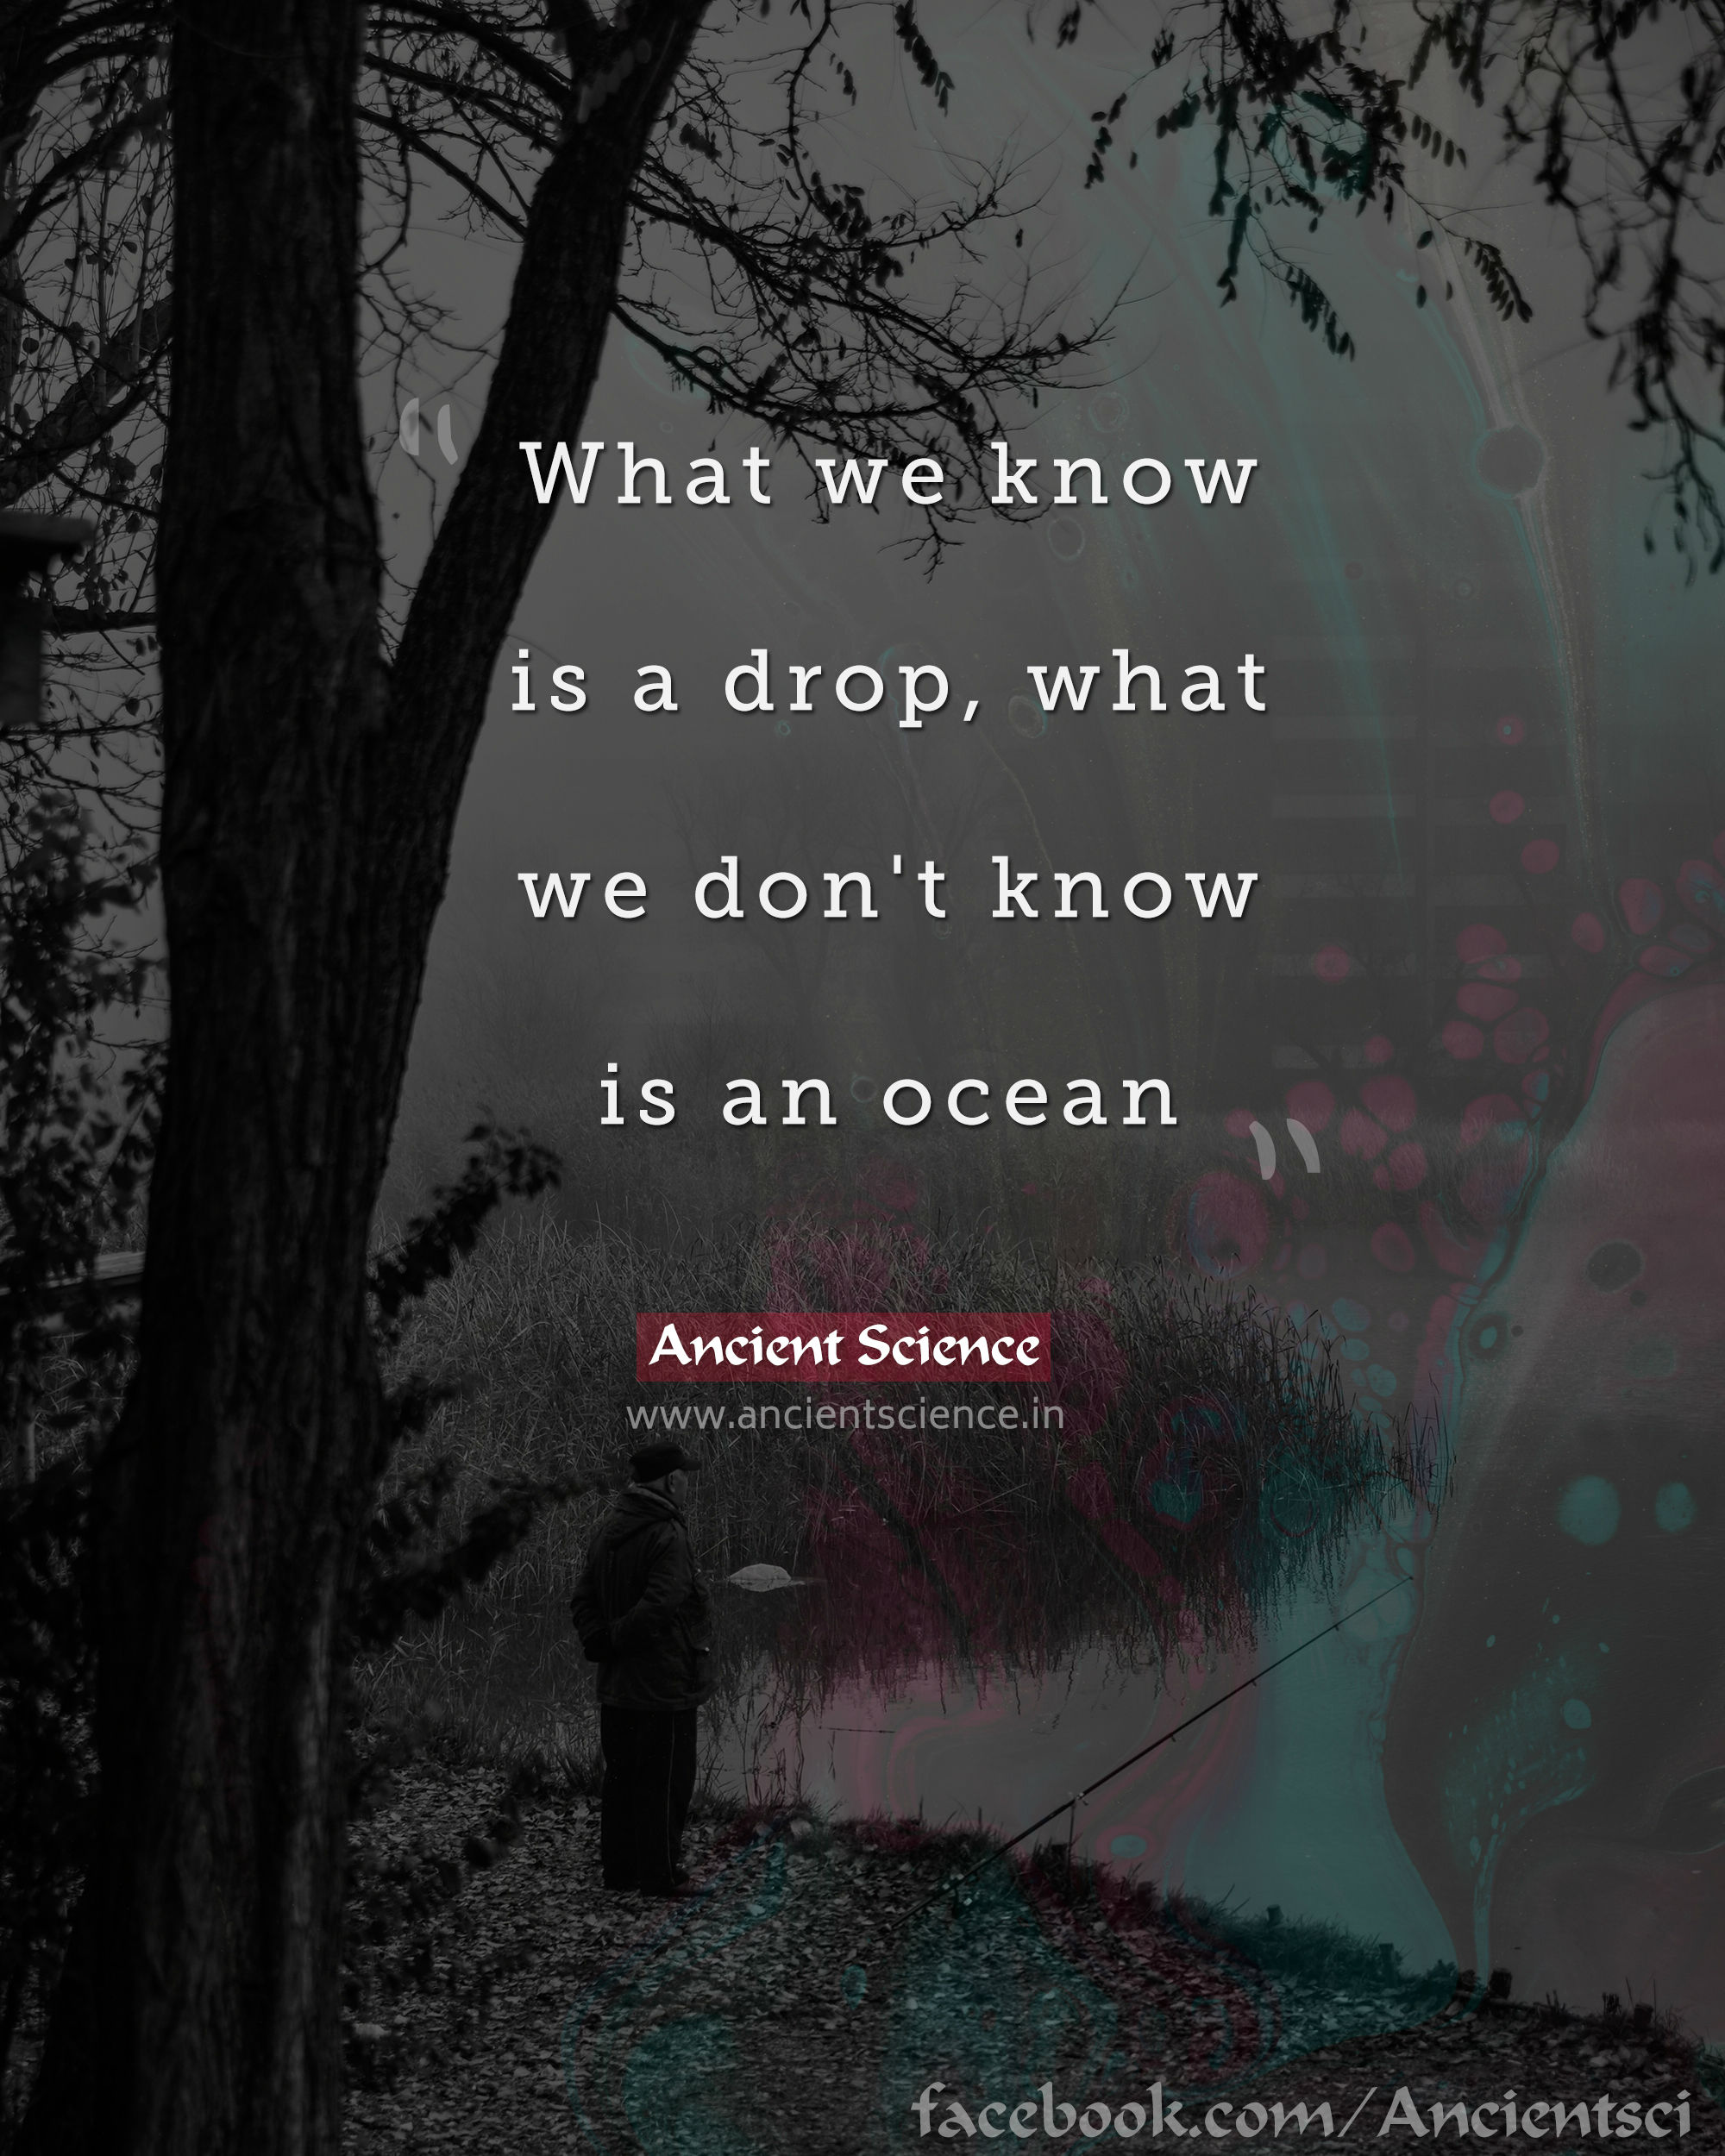 What we know is a drop, what we don't know is an ocean